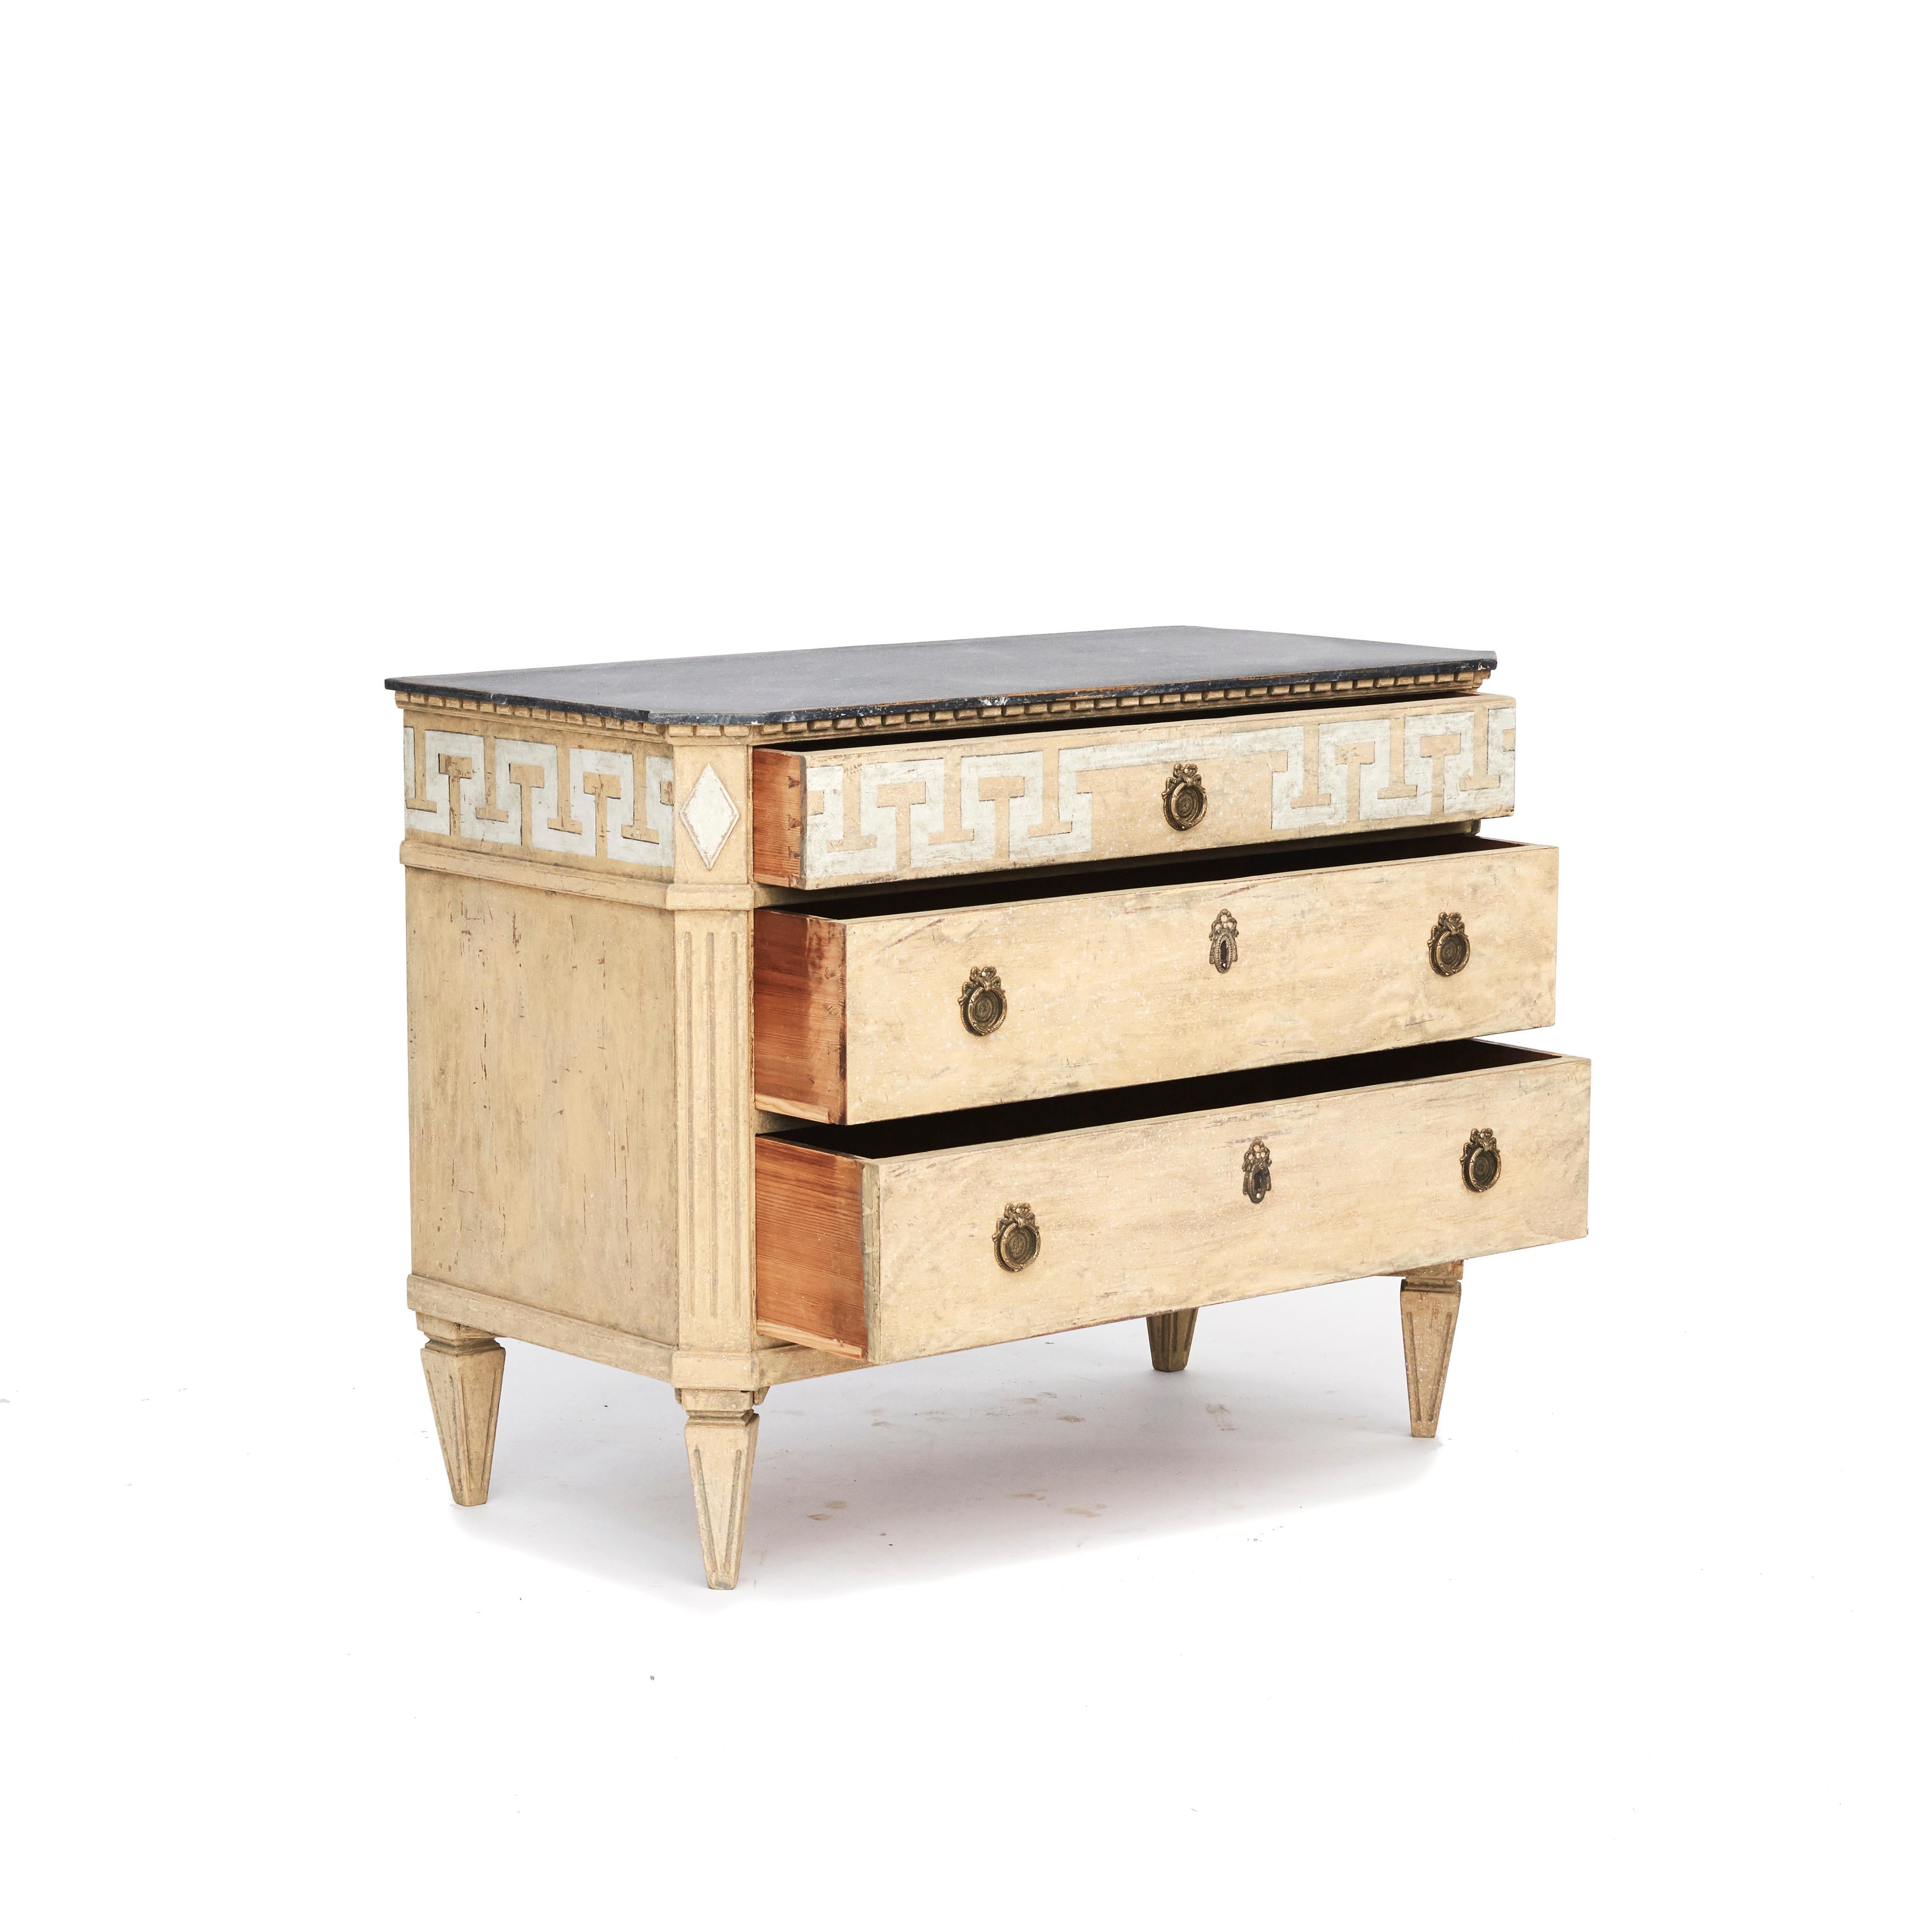 Decorative Swedish Gustavian Style chest of drawers painted in dusty antique yellow, typical of the Scandinavian taste for light palettes.
Wooden blue-gray faux marbled tabletop and dentil moldings.
Three drawer, upper drawer decorated with white